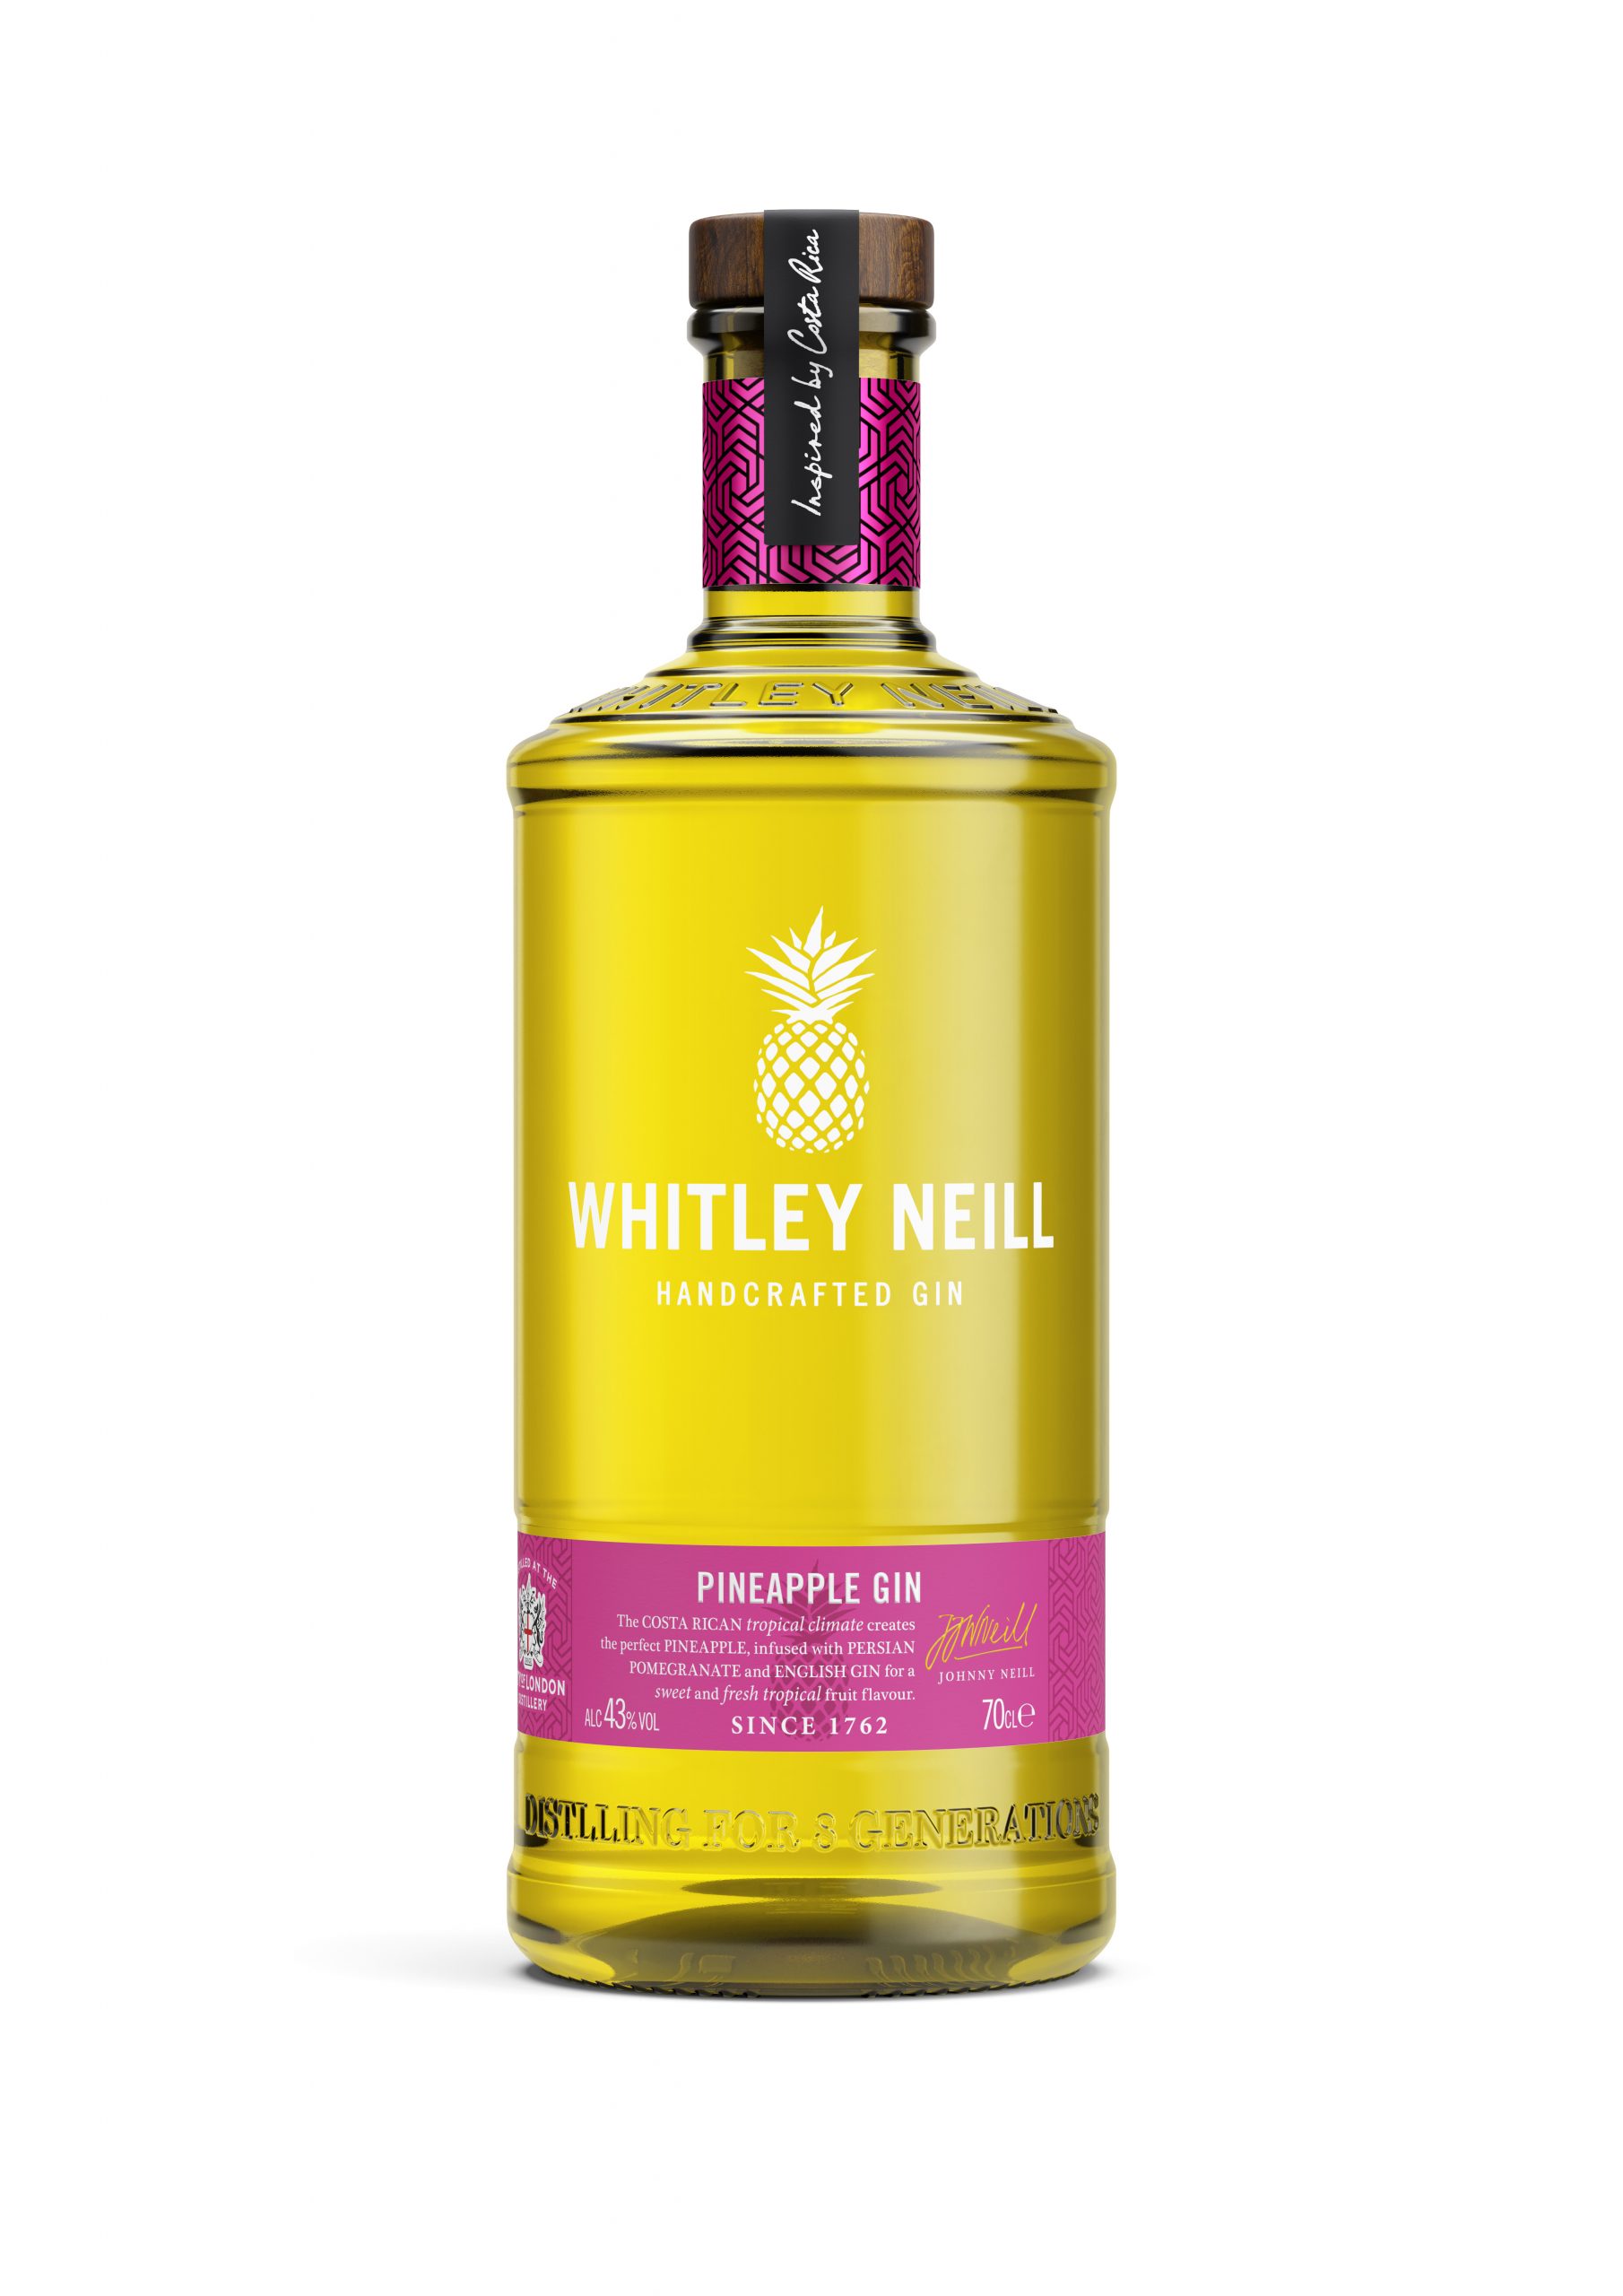 Whitley Neill gears up for summer with new range